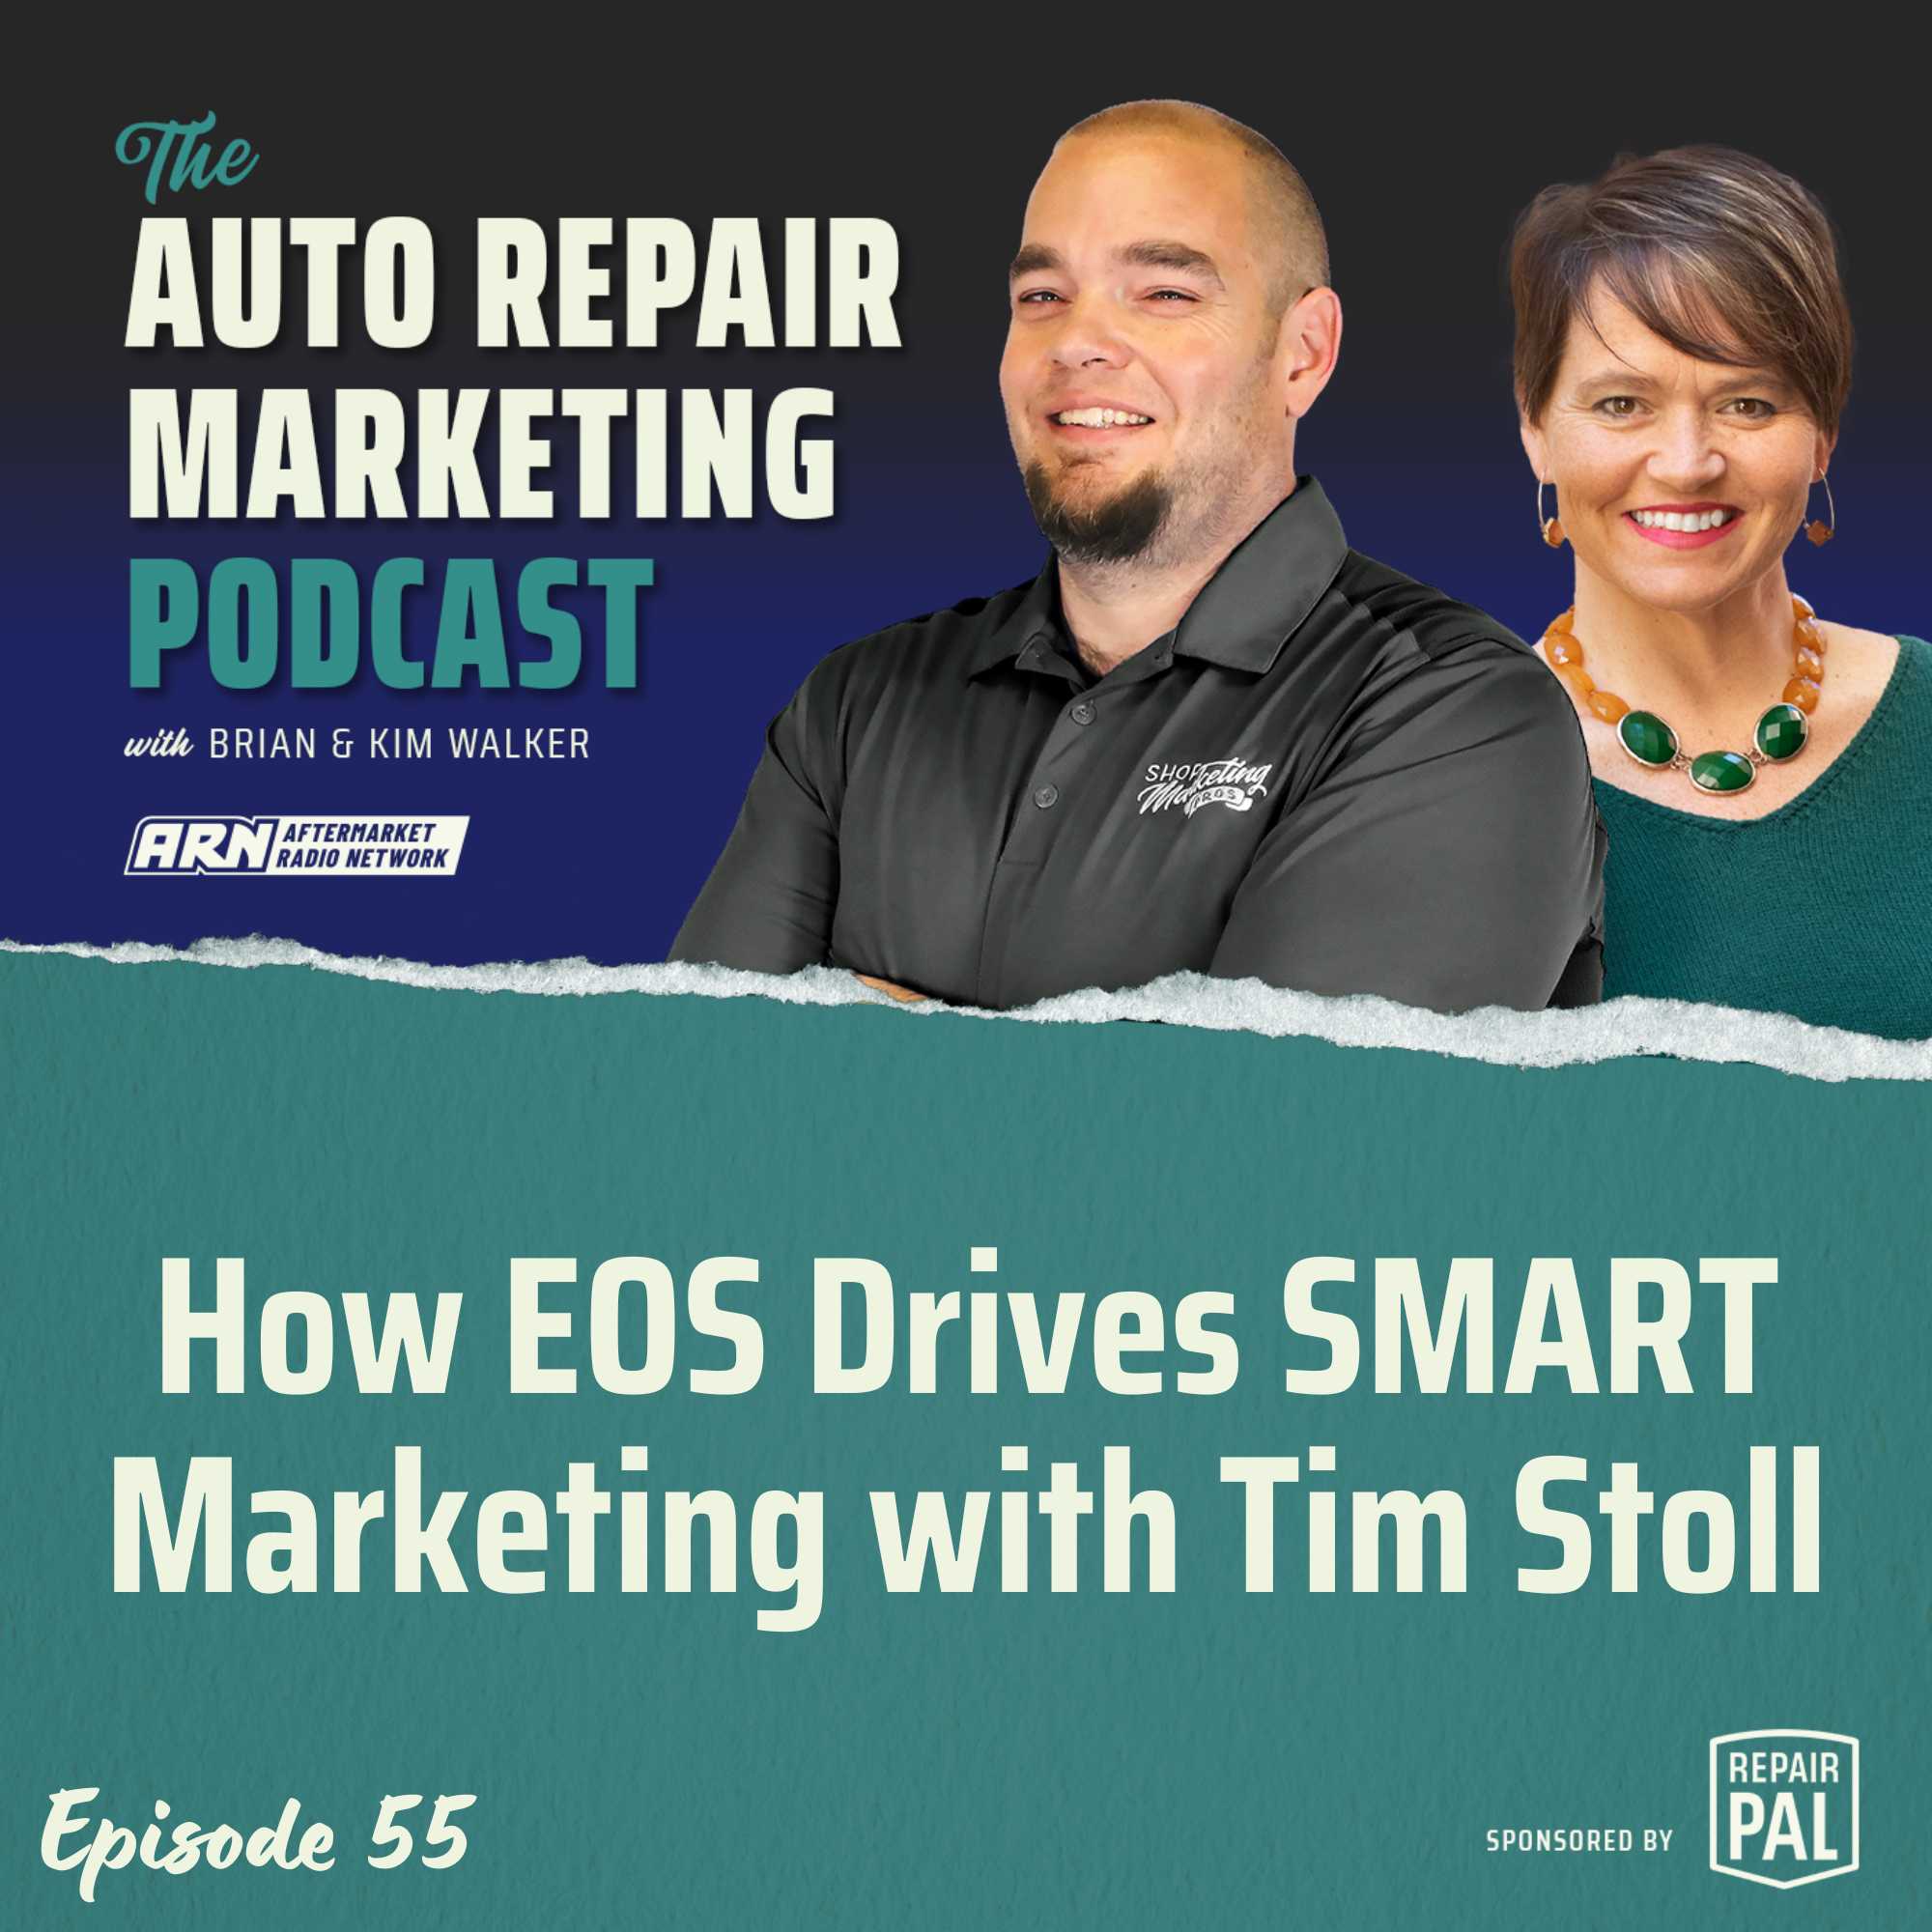 The Auto Repair Marketing Podcast Episode 55. Brian & Kim Walker talking about the topic "How EOS Drives SMART Marketing w/ Tim Stoll". Sponsored by Repair Pal.